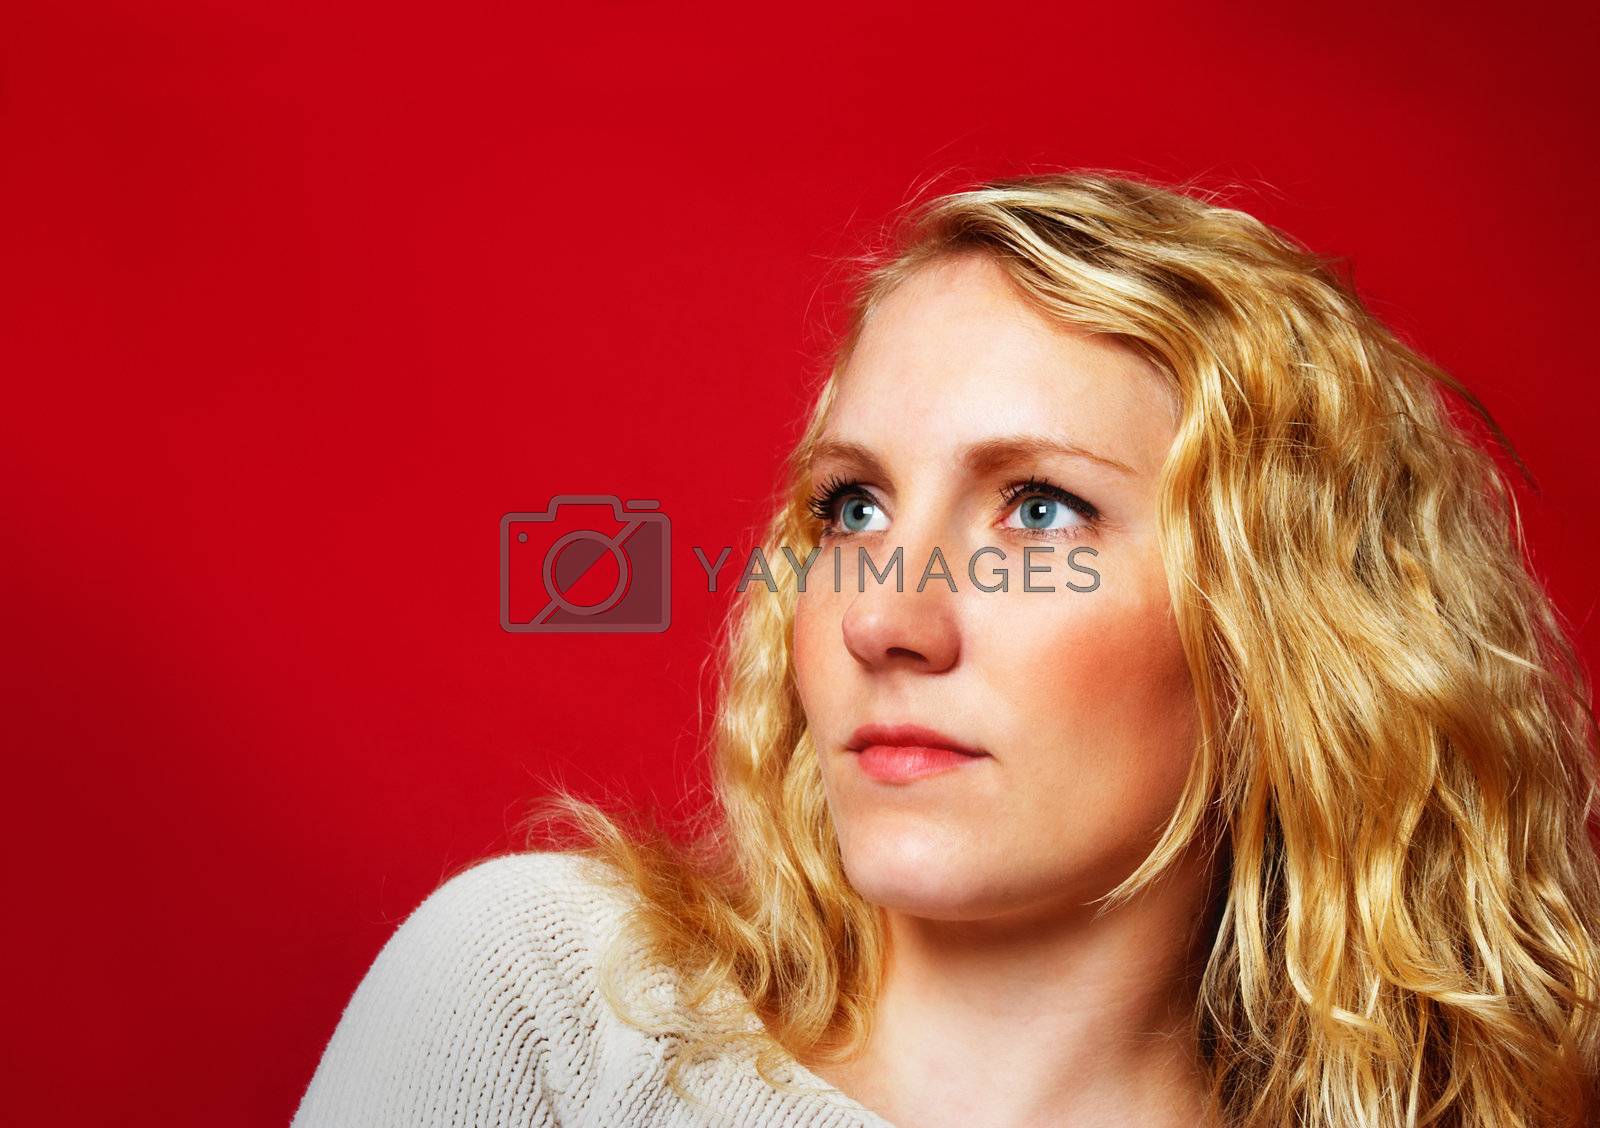 Royalty free image of Pretty blond girl on red by MikLav